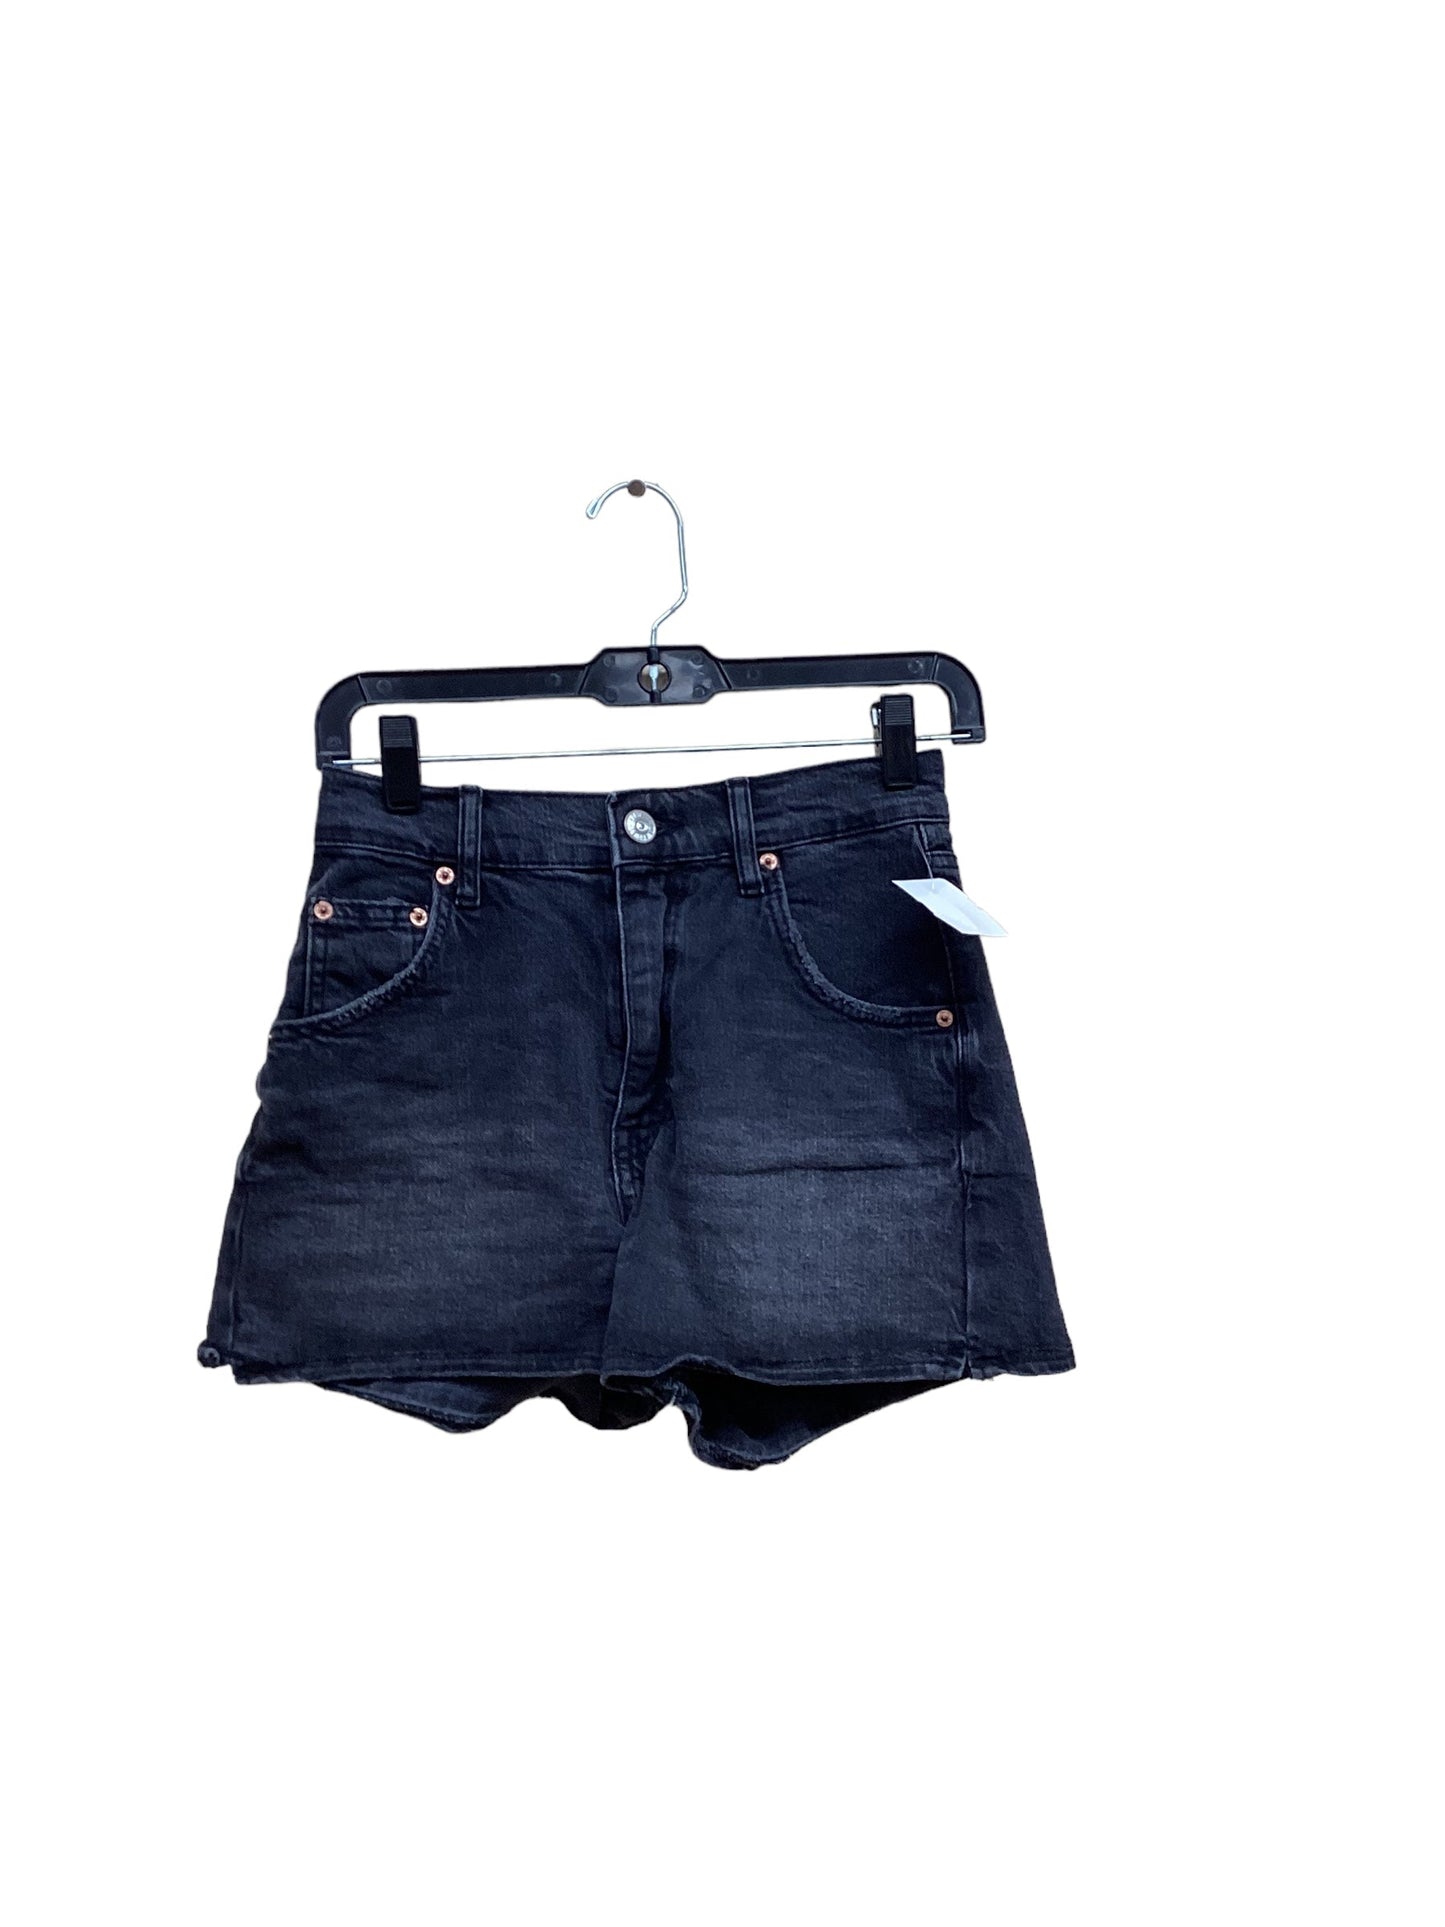 Shorts By Bdg  Size: 0